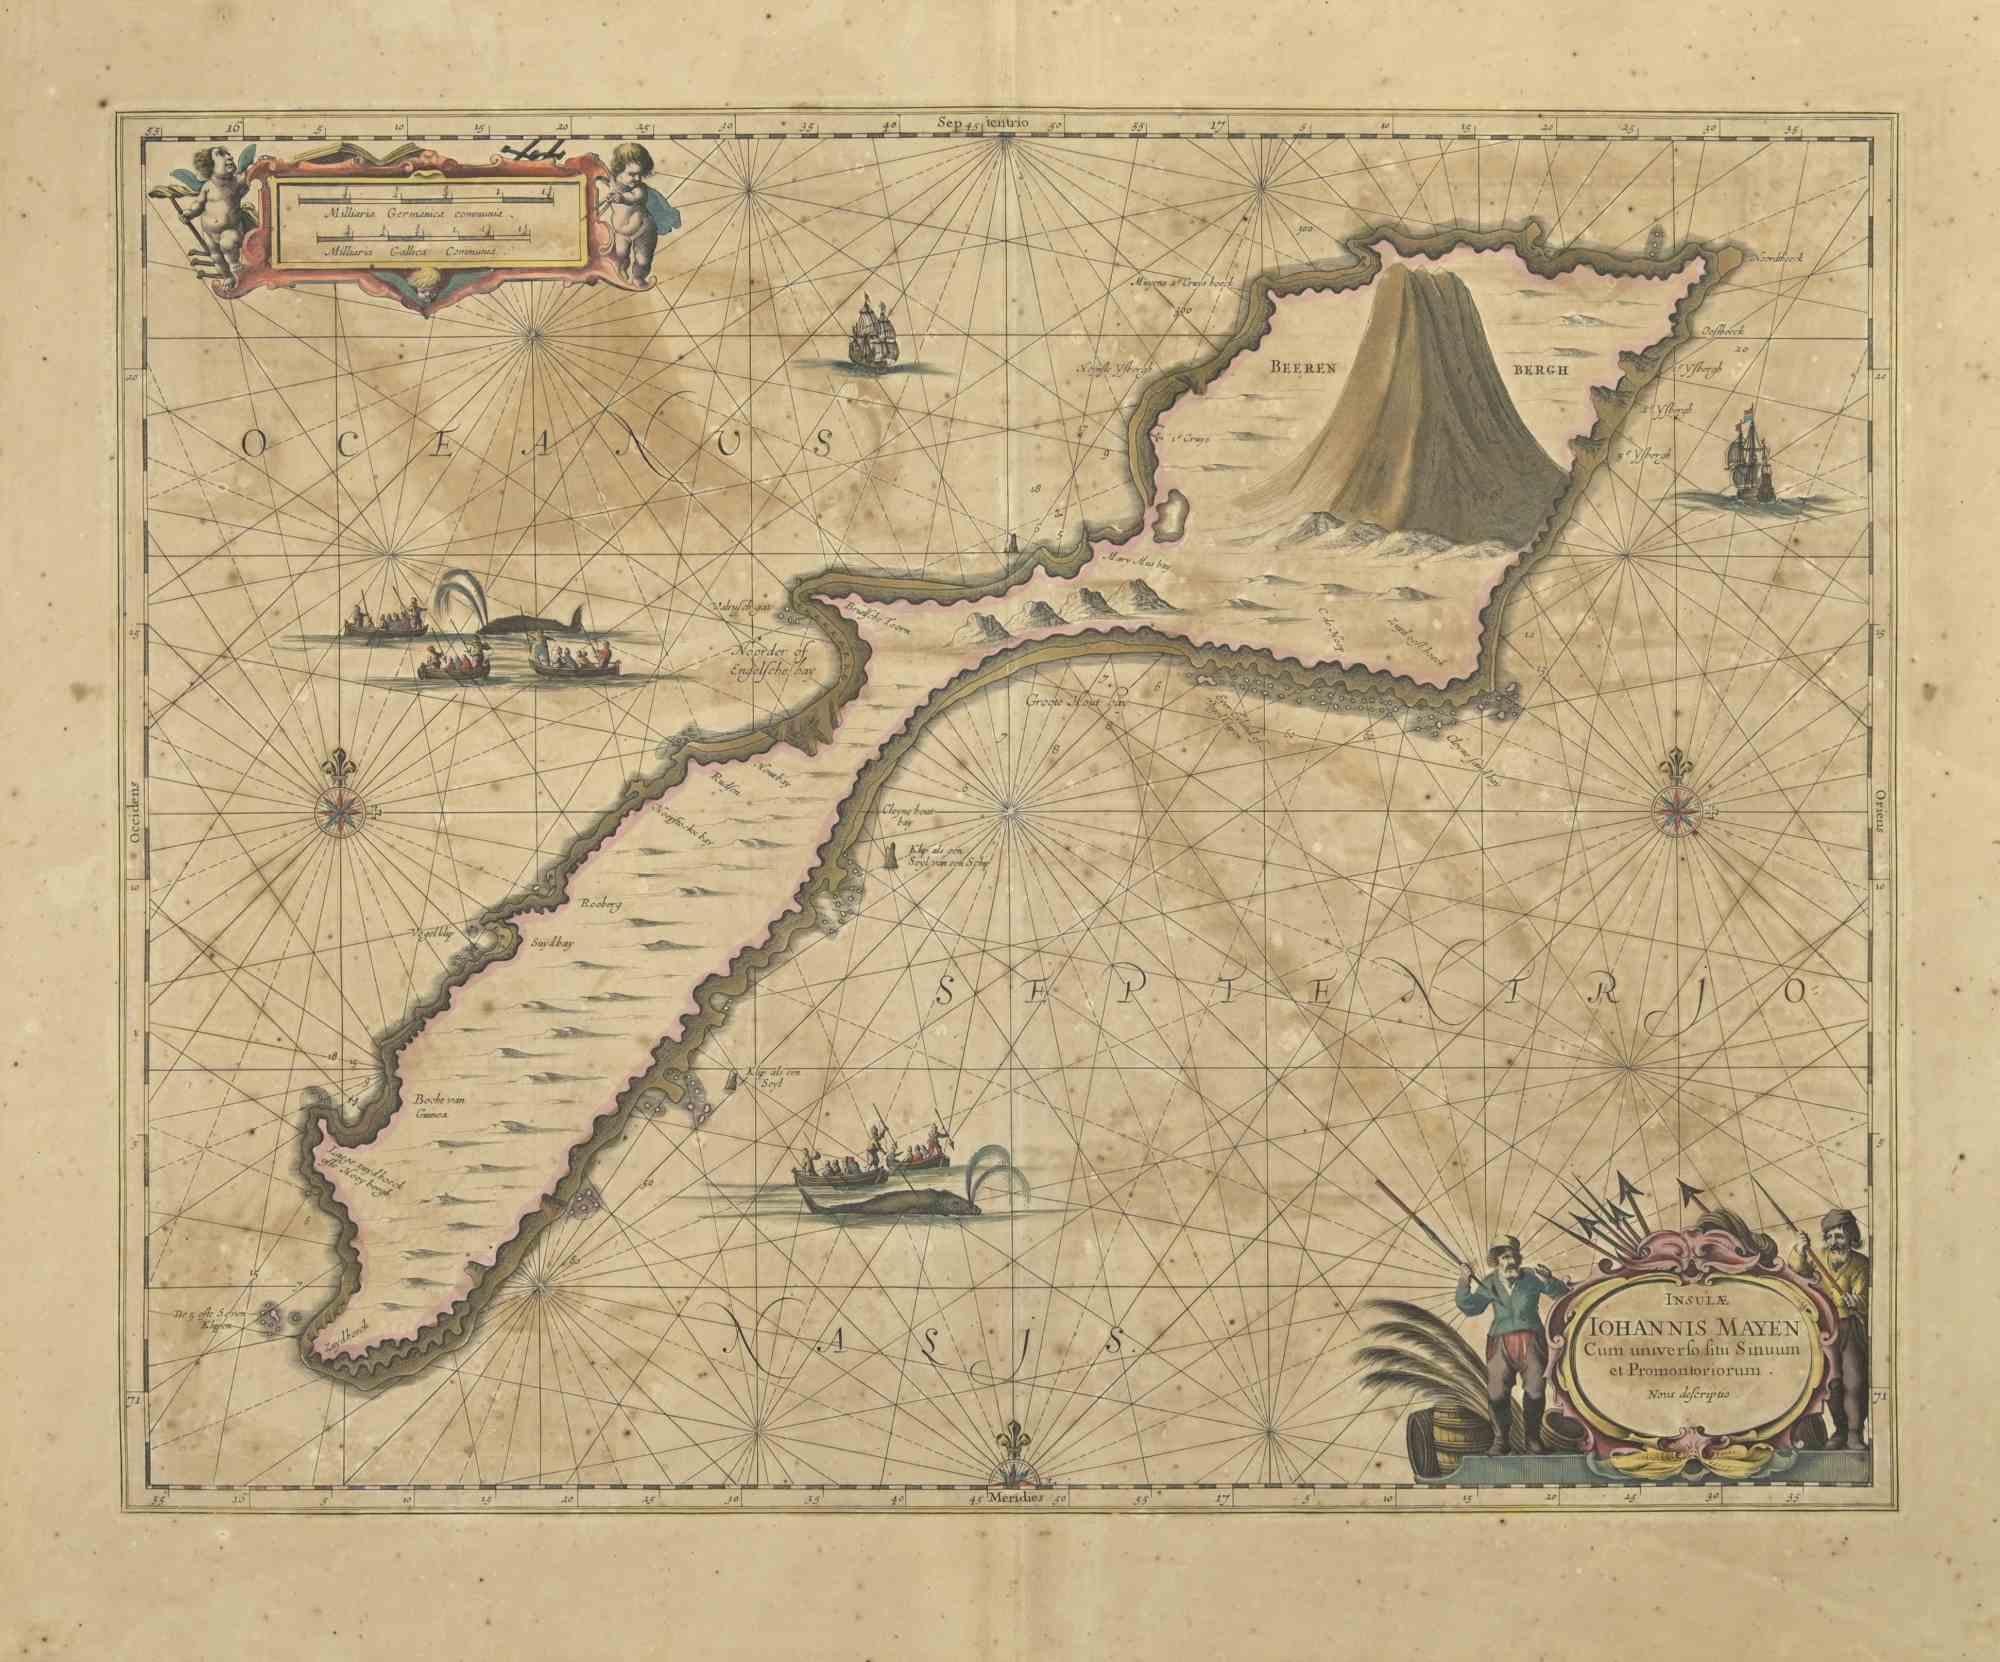 Antique Map - Oceanus is an antique map realized in 1650 by Johannes Janssonius (1588-1664).

The Map is Hand-colored etching, with coeval watercoloring.

Good conditions with slight foxing.

From Atlantis majoris quinta pars, Orbem maritimum [Novus